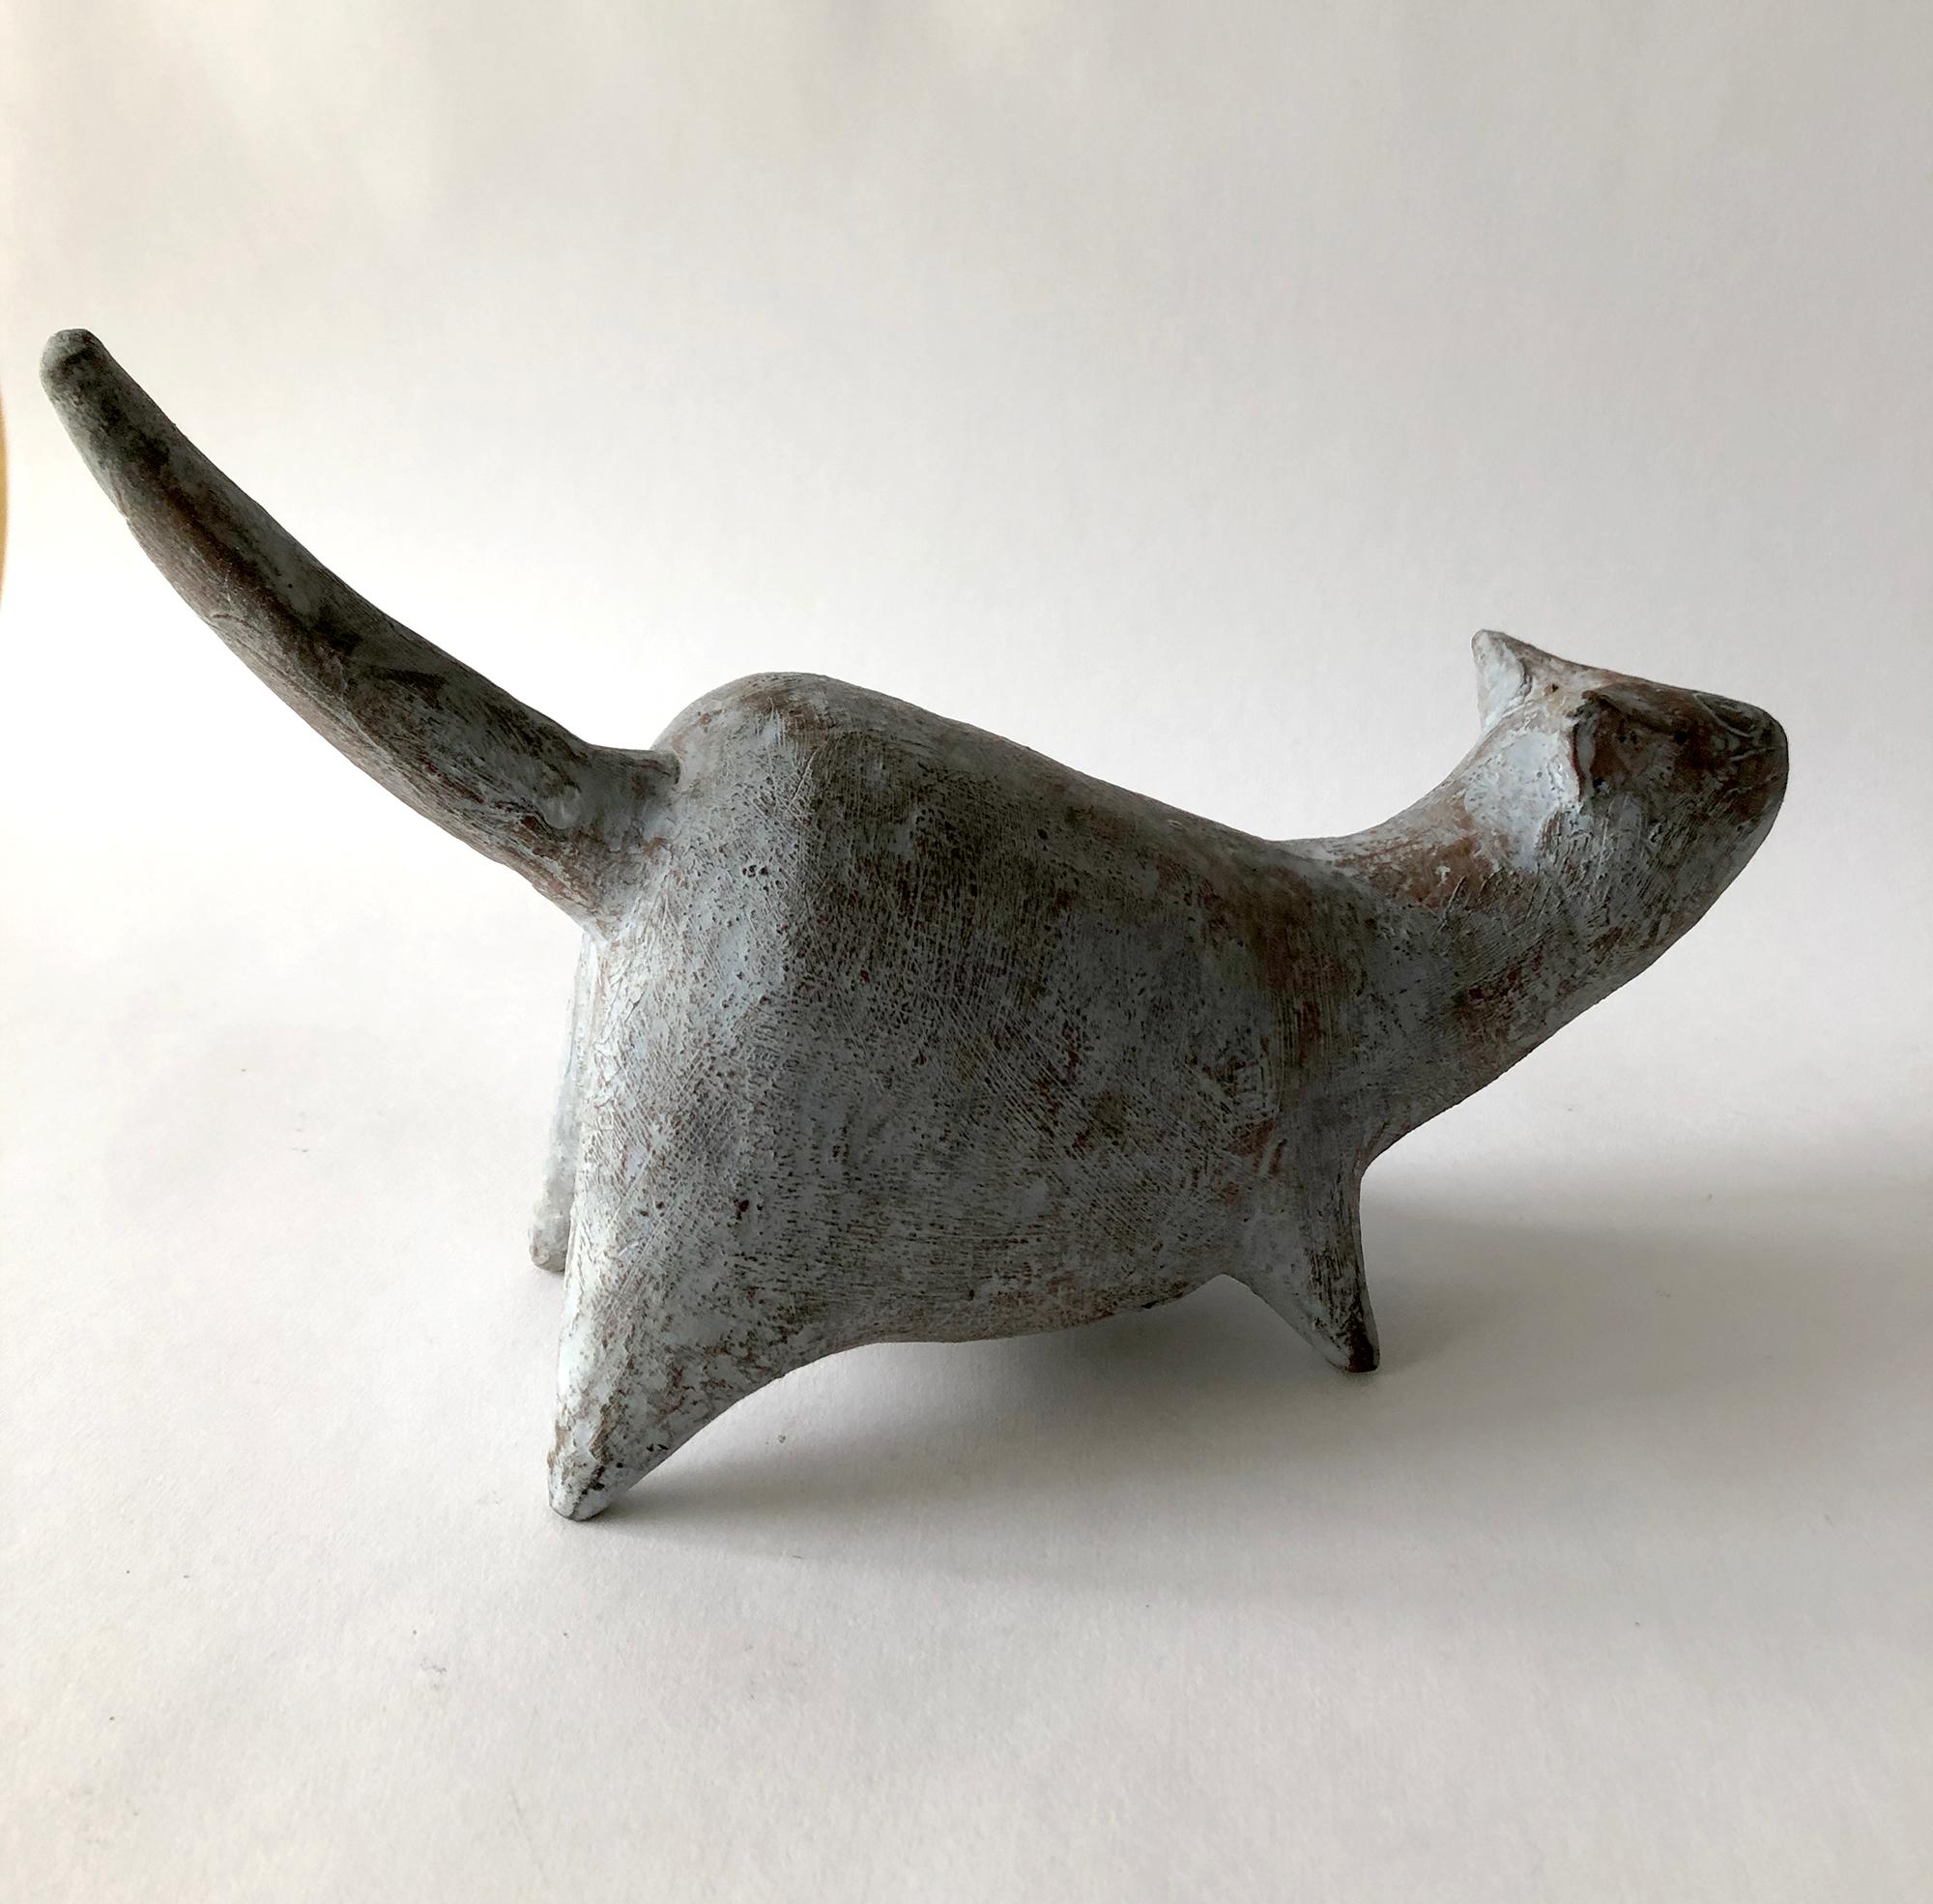 Handmade, one of a kind cat sculpture with cool pale blue glaze over brown stoneware by Leza Sullivan McVey of Cleveland, Ohio. Cat measures: 6.25